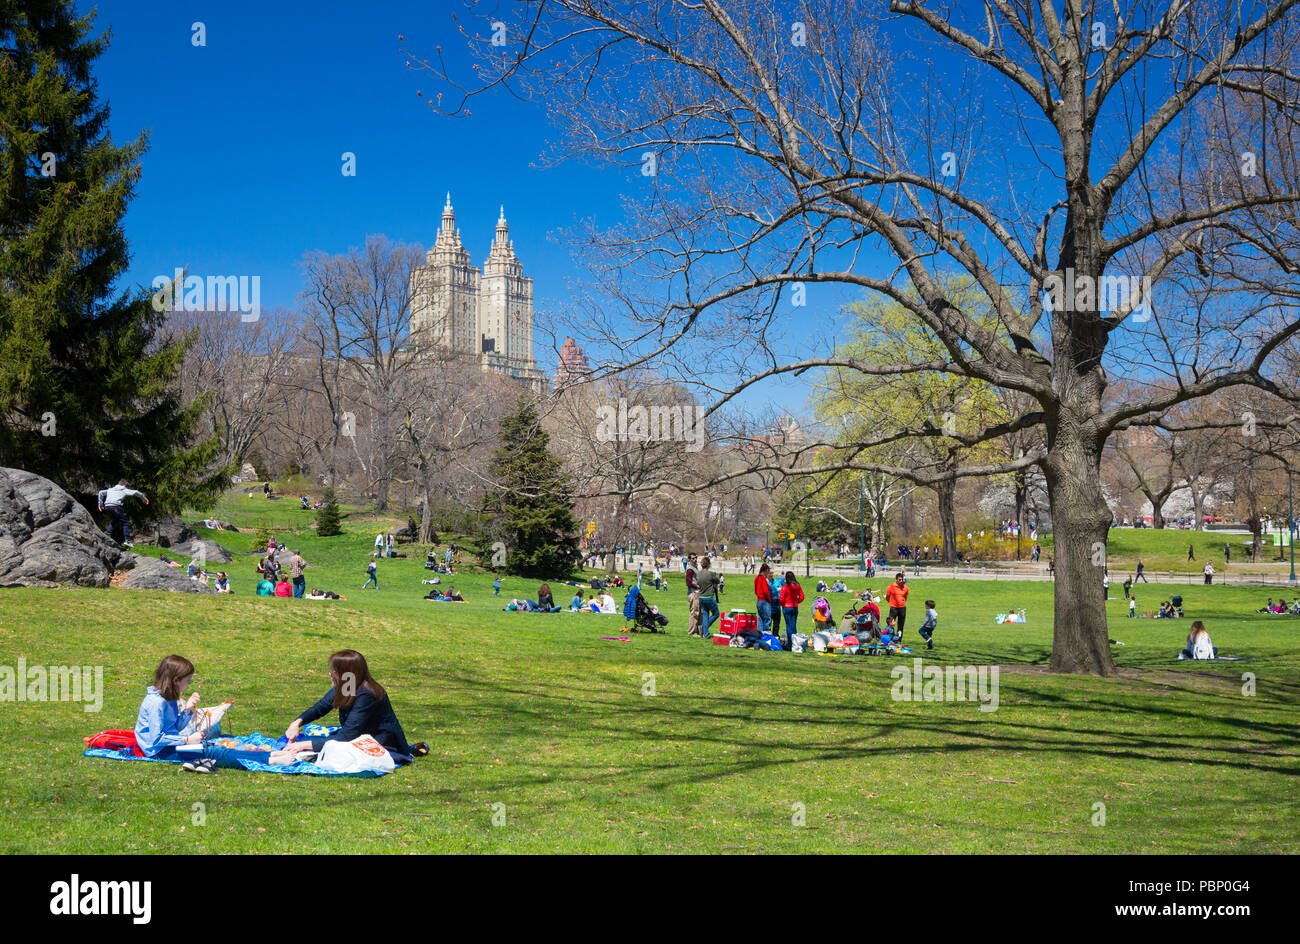 Relaxing in Central Park, New York, USA Stock Photo